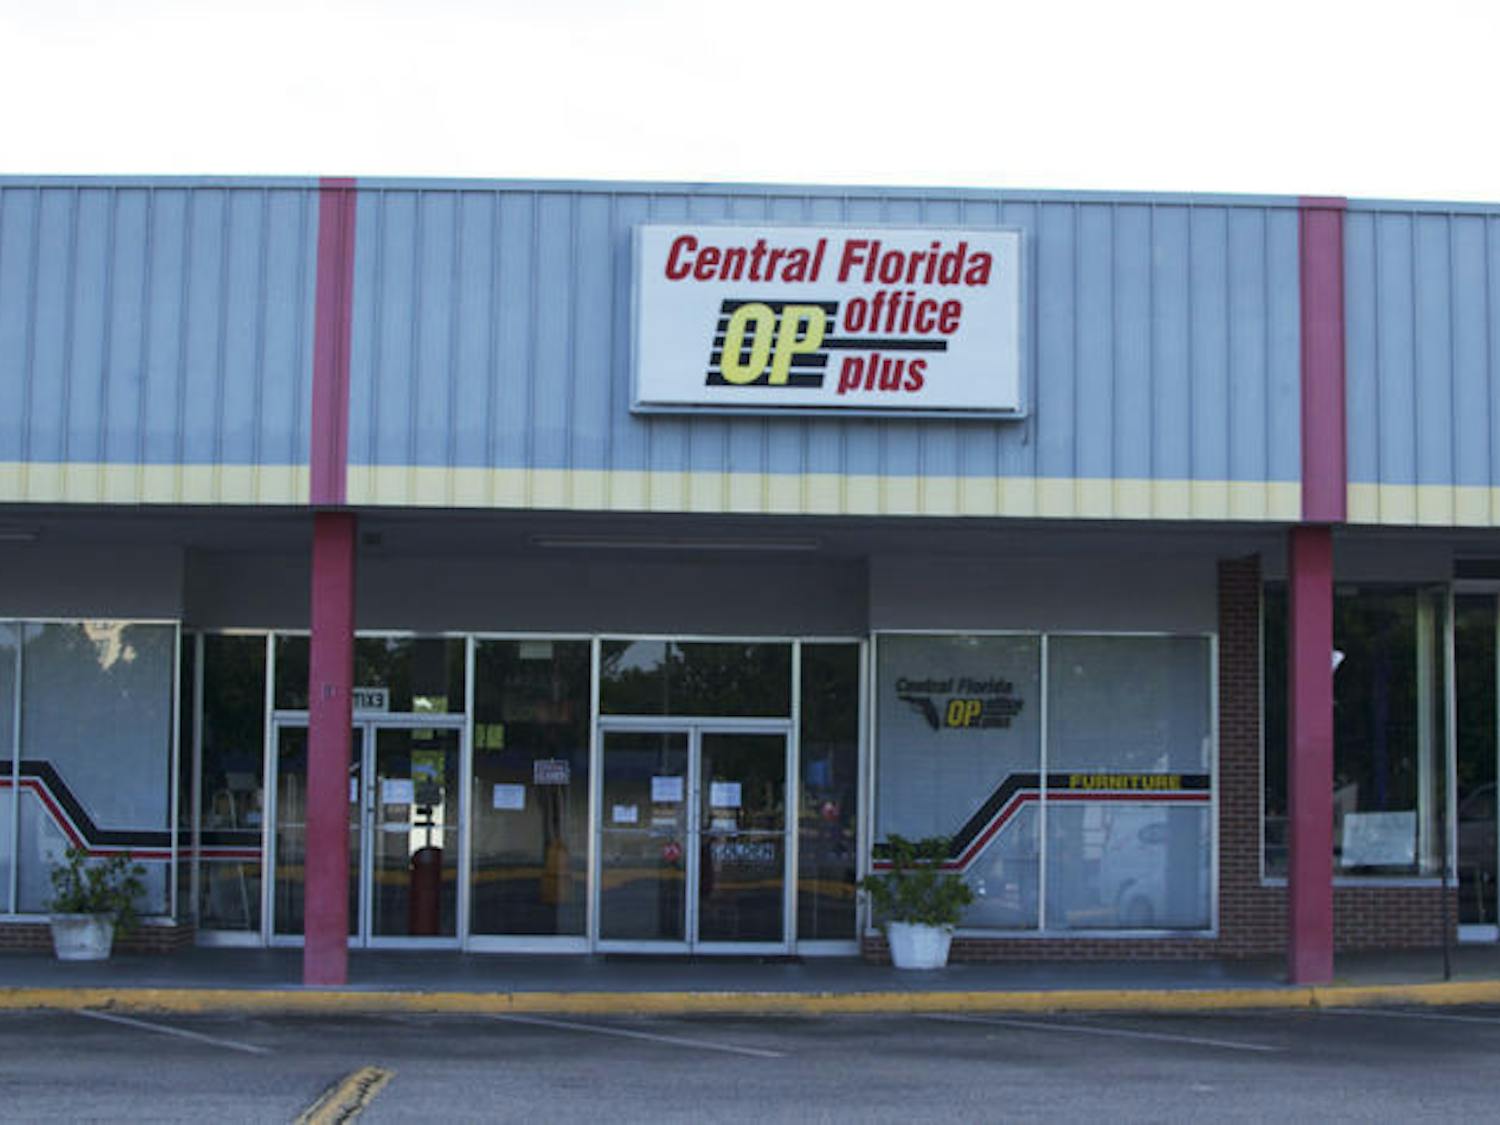 Central Florida Office Plus, located at 10 Northwest Sixth St., closed its doors Tuesday after 56 years of business. The store was a hub for local artists and office workers.&nbsp;
&nbsp;